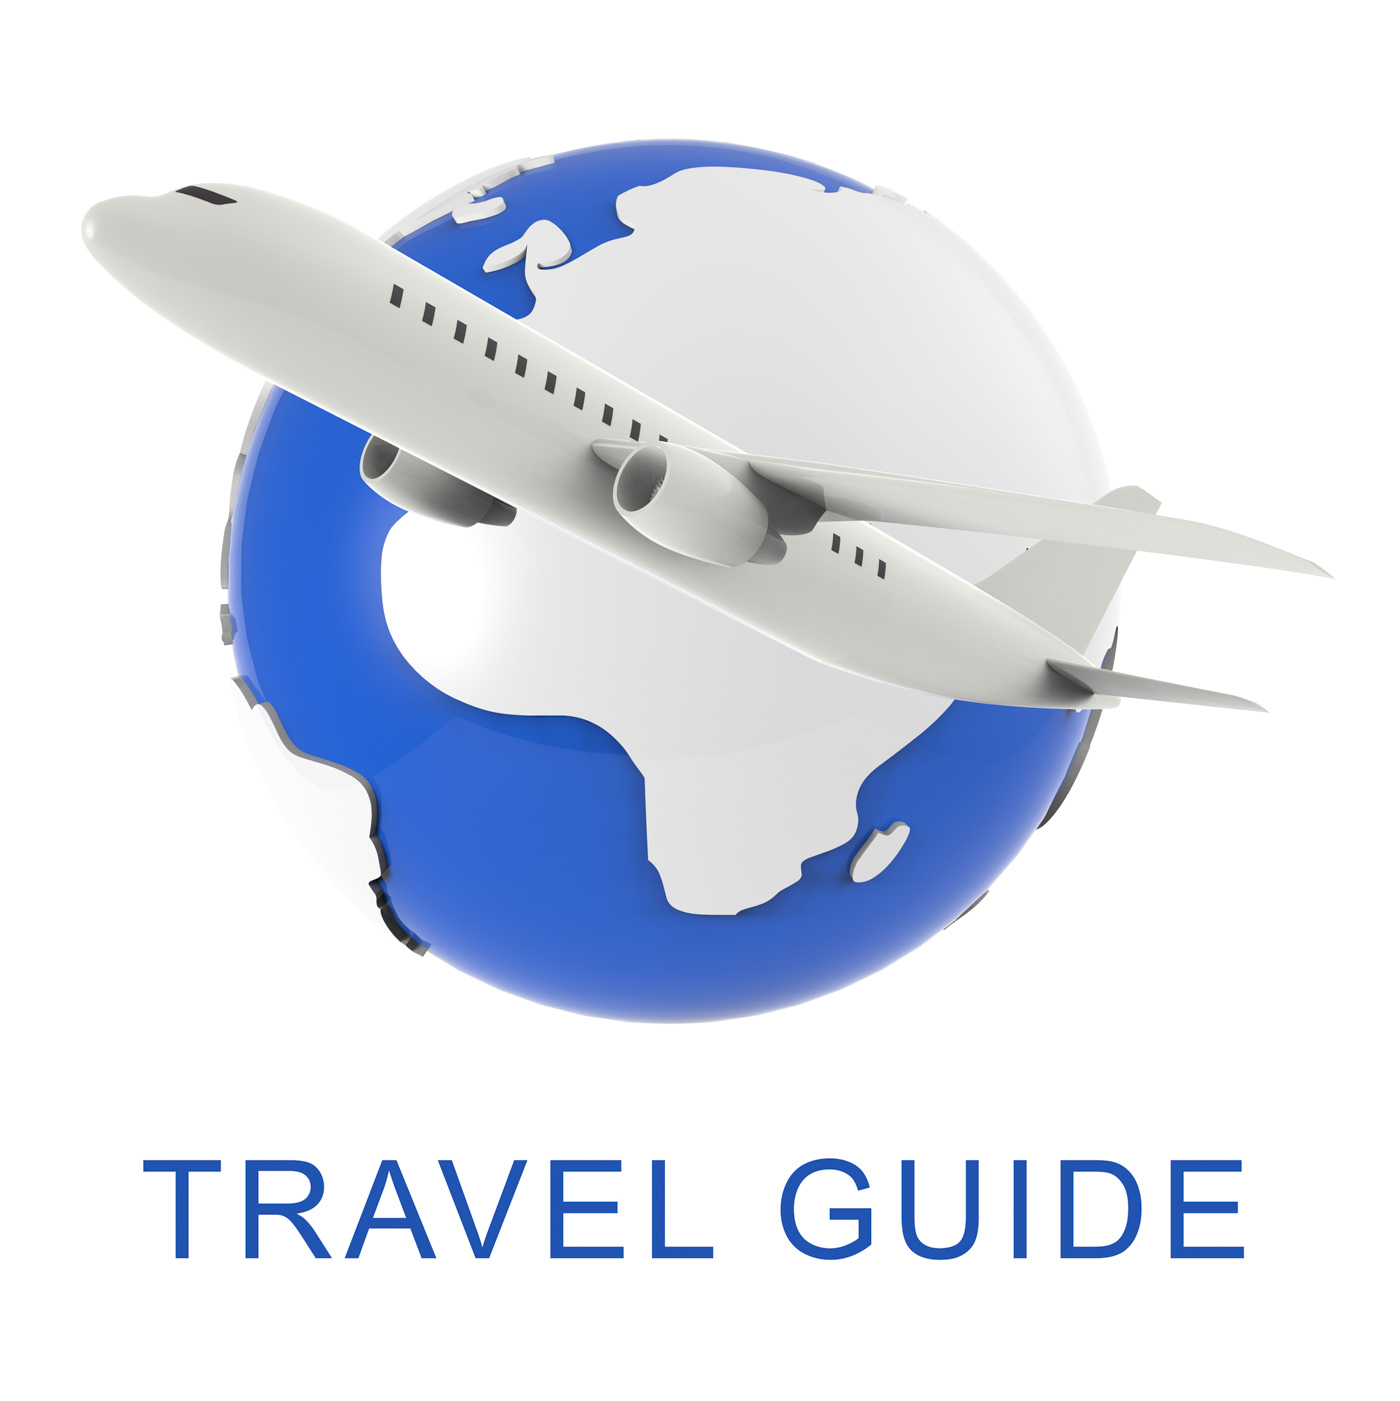 Travel guide means holiday tours 3d rendering photo